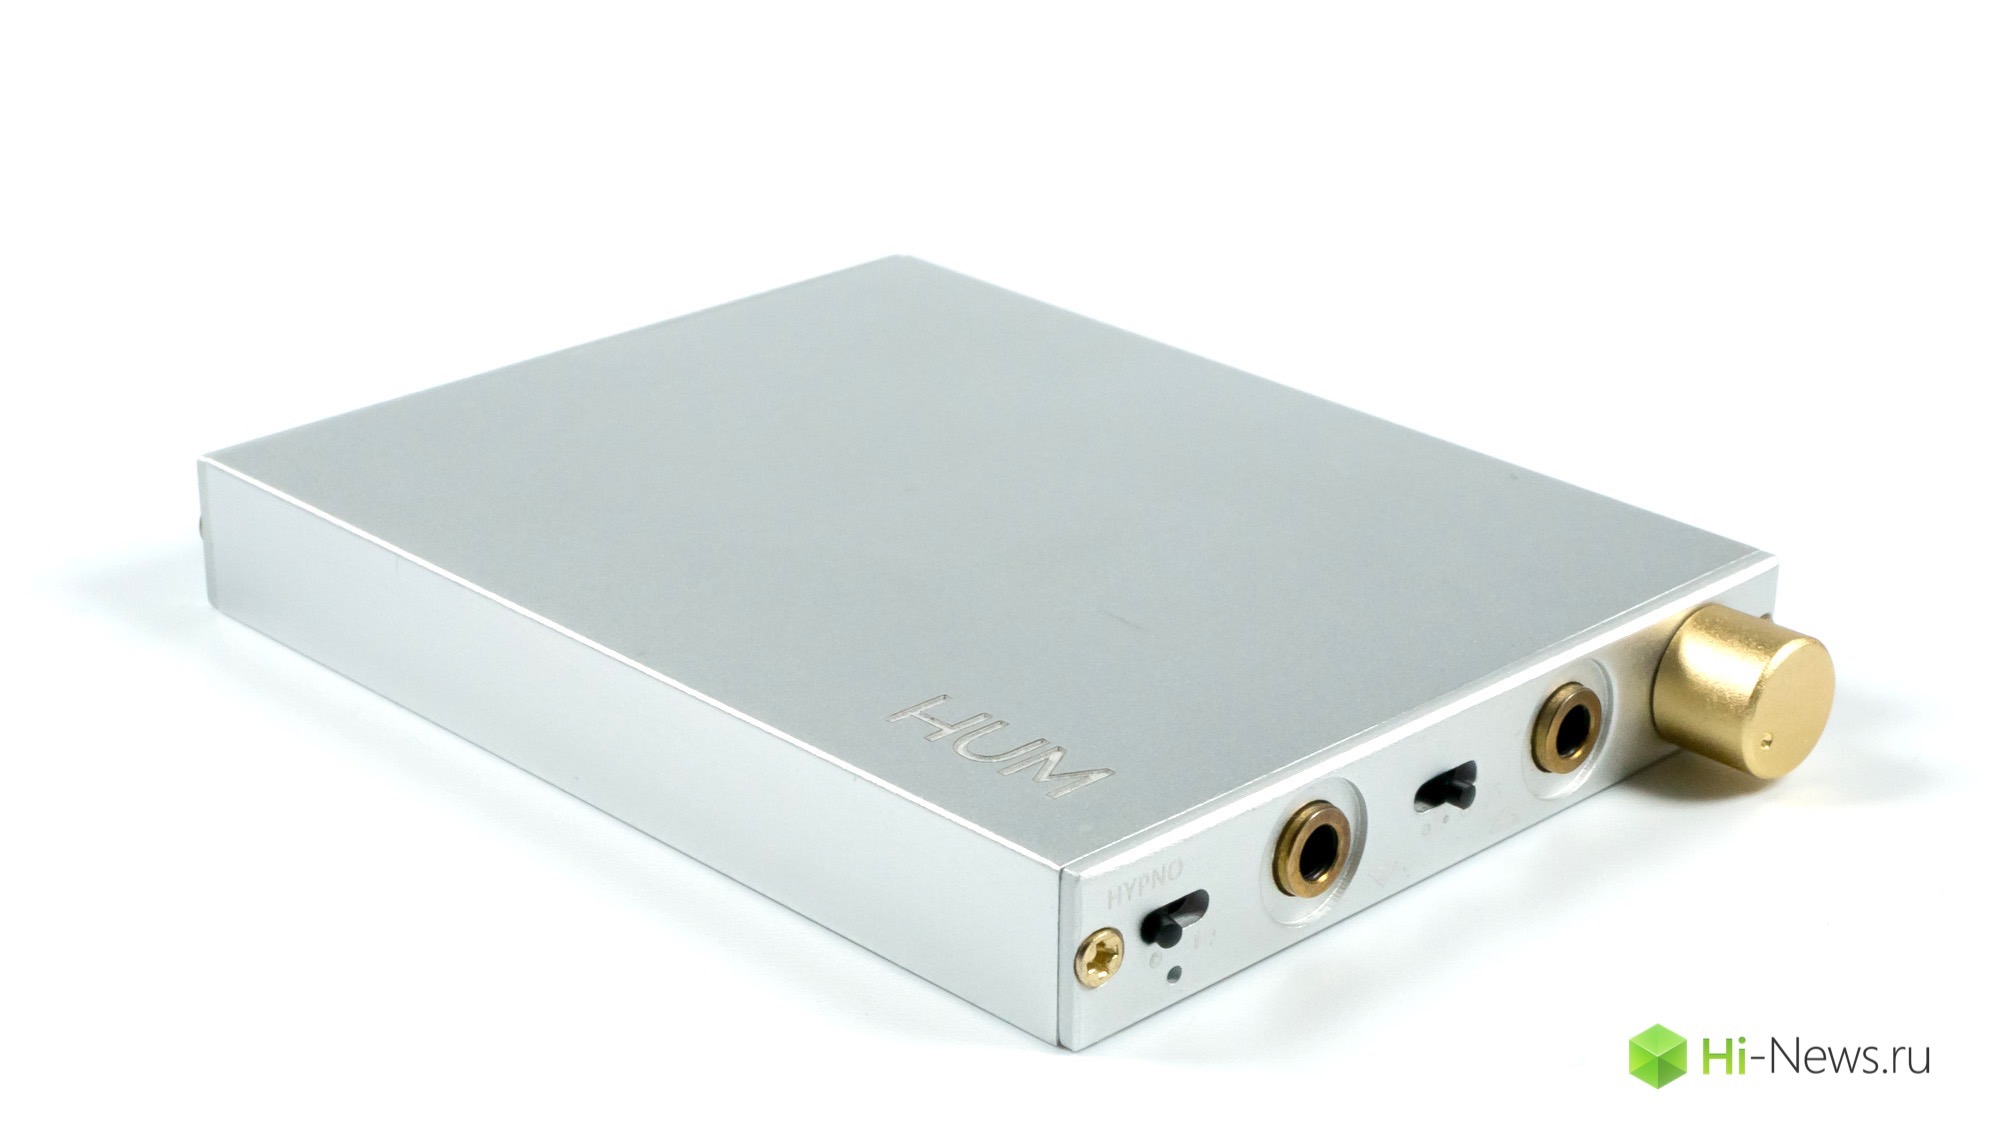 Review of the portable headphone amplifier HUM Hypno